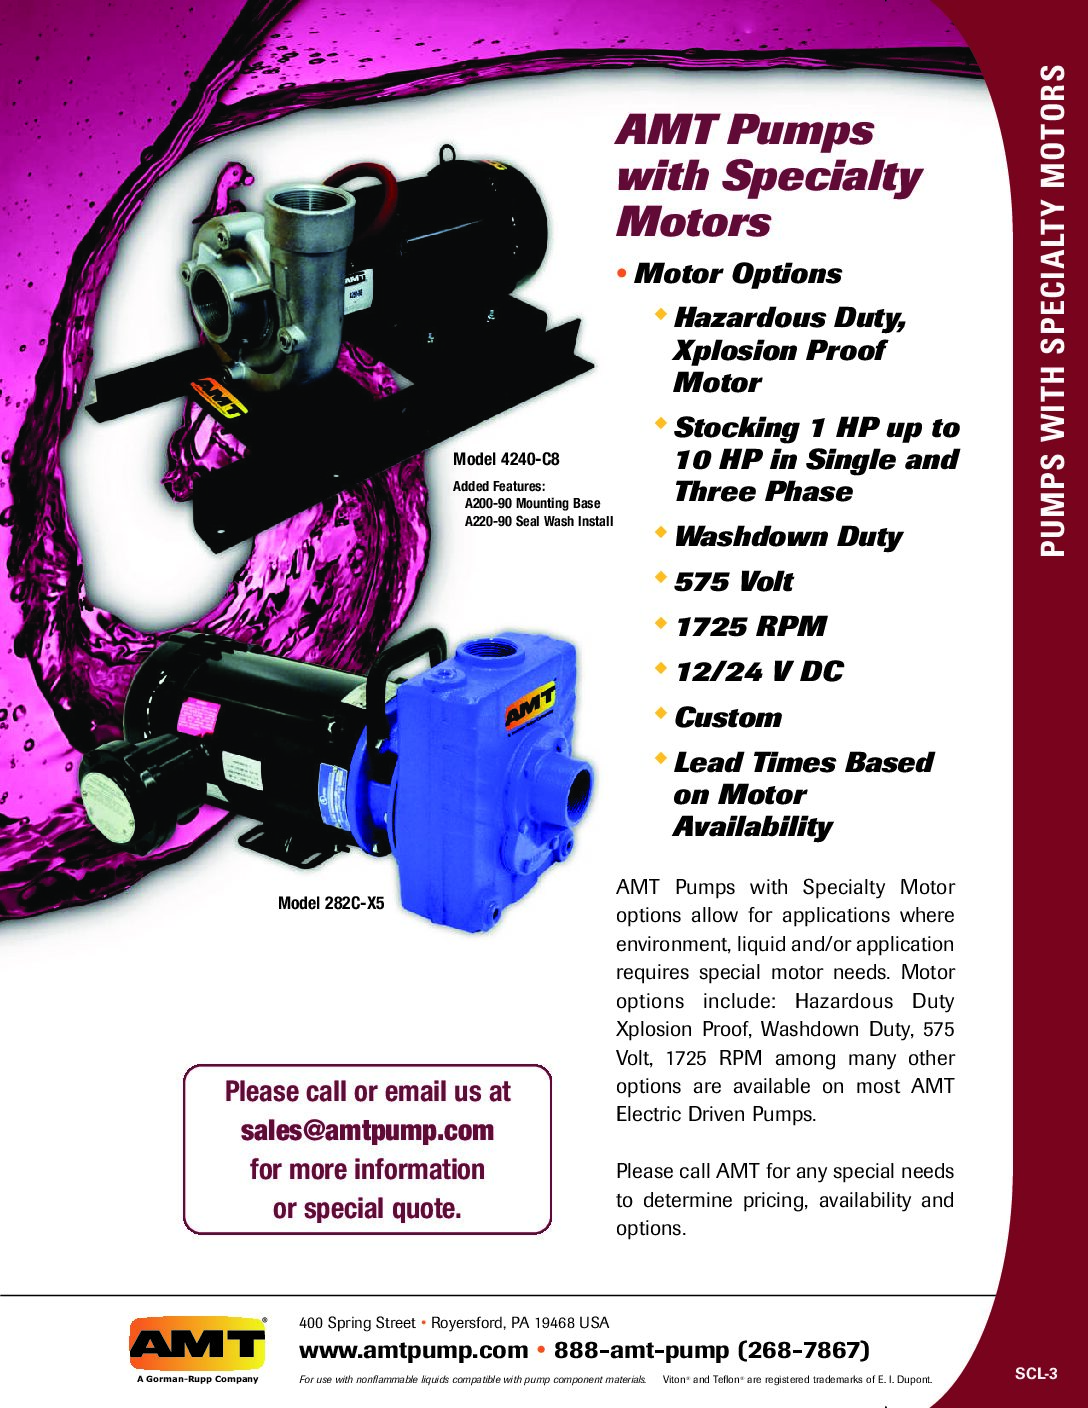 AMT Pumps With Specialty Motors